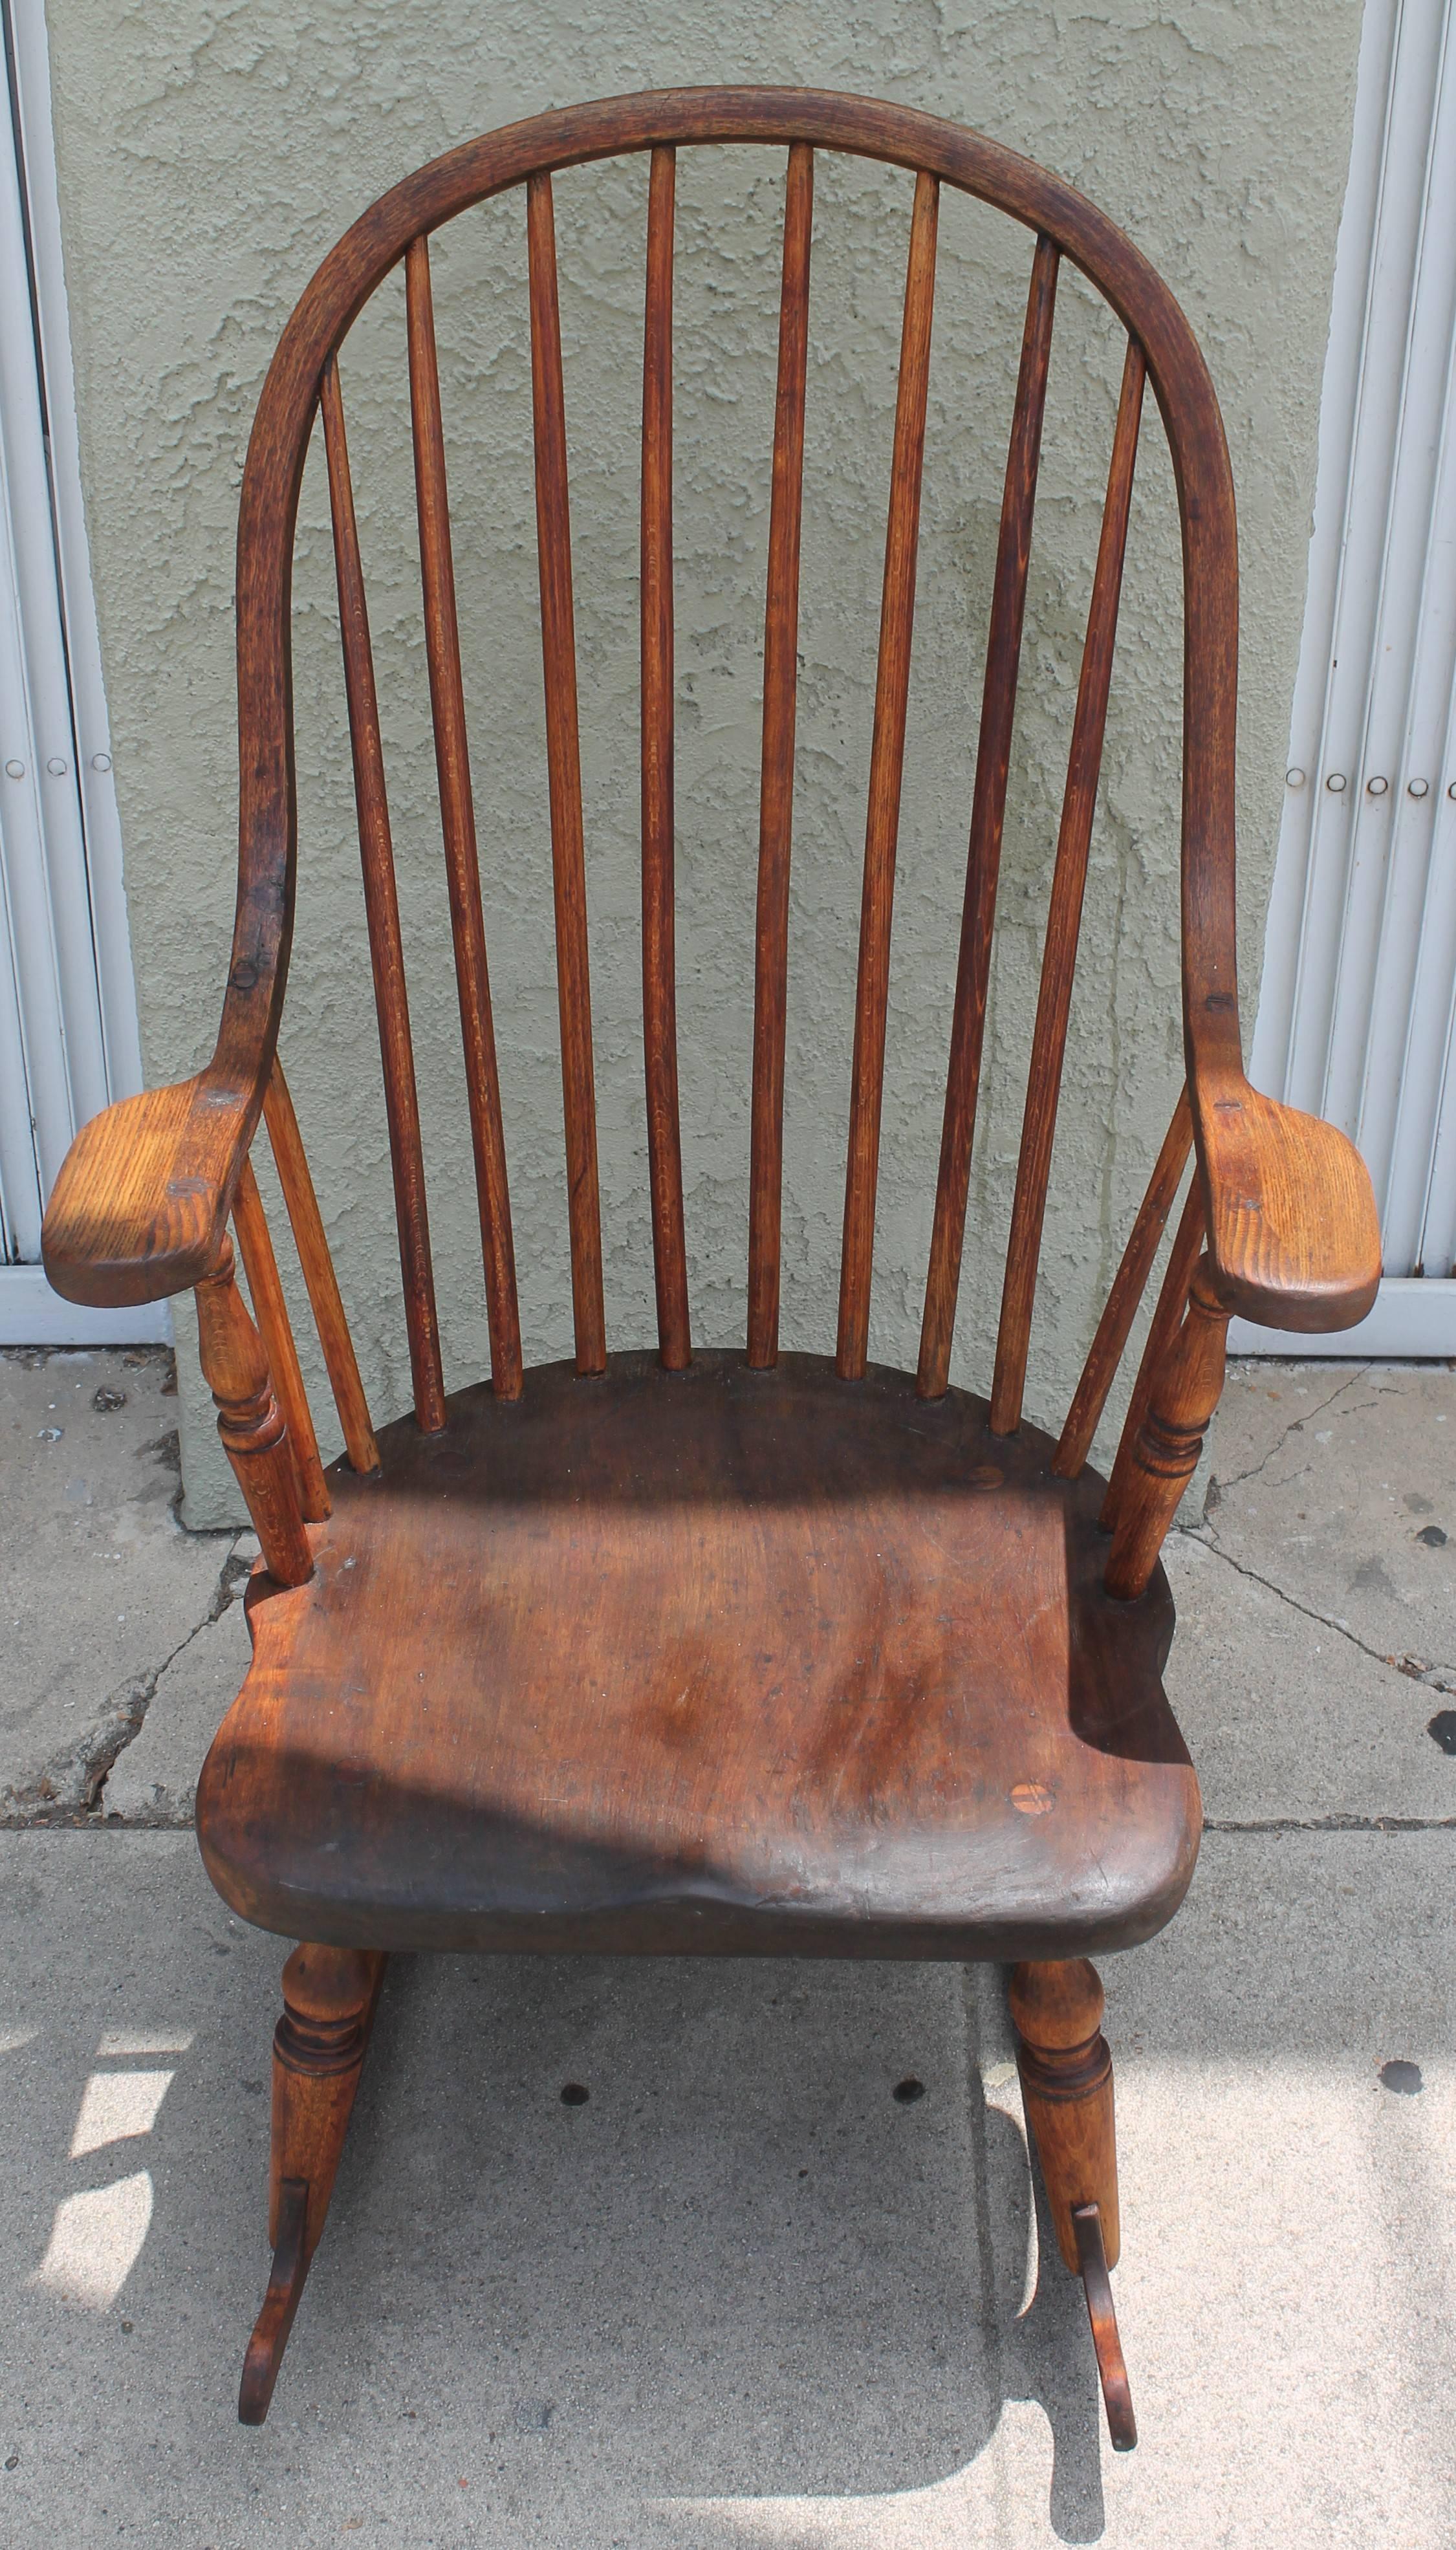 Early 19th century handmade amazing Windsor chair from New England. This chair is mortised and all hand-carved. The condition is very good with a nice mellow worn patina.